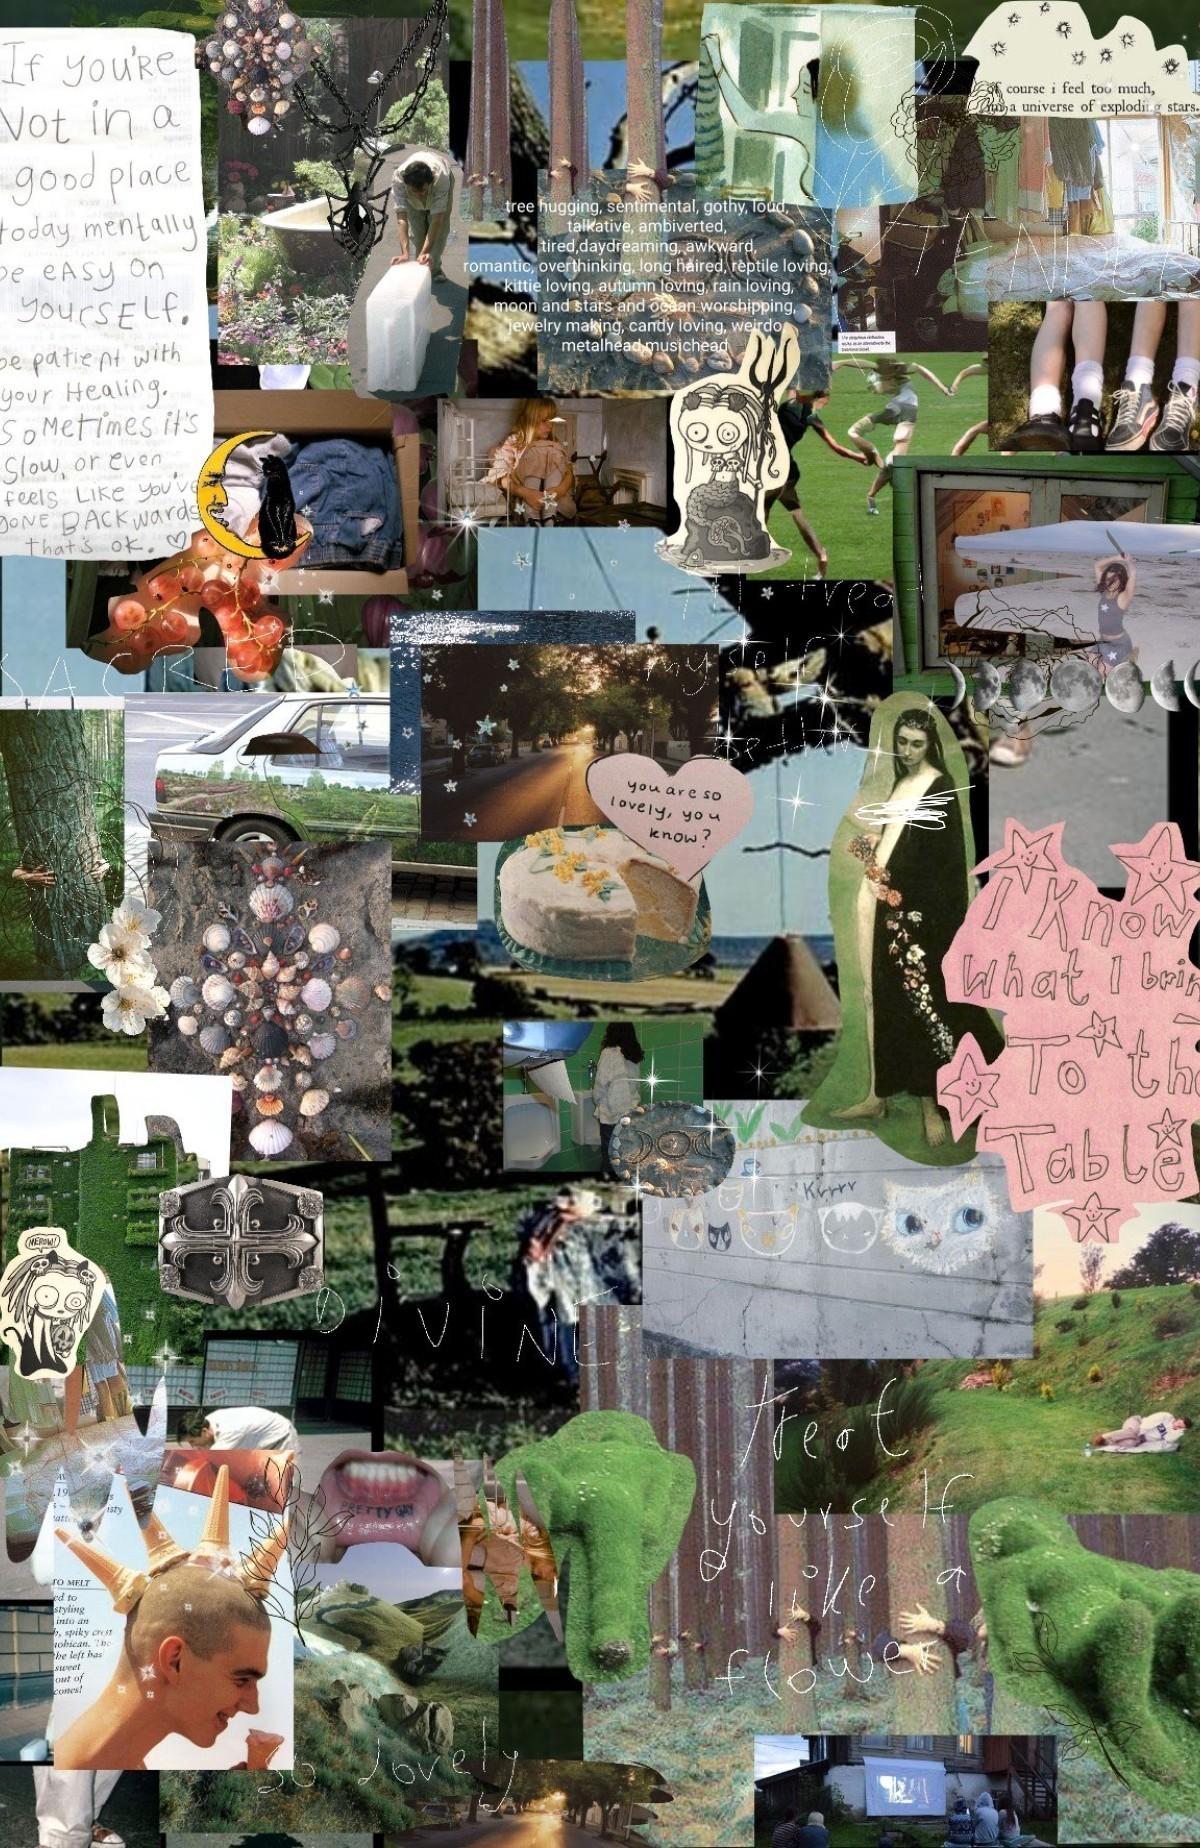 october 5th 2022 ♥ hi evrybody n happy autumn!!! sorry 4 not being as active, school is beating me up lately, hope ur all doing well !! this is a like more personal collage sorta surrounding being more kind w oneself. 